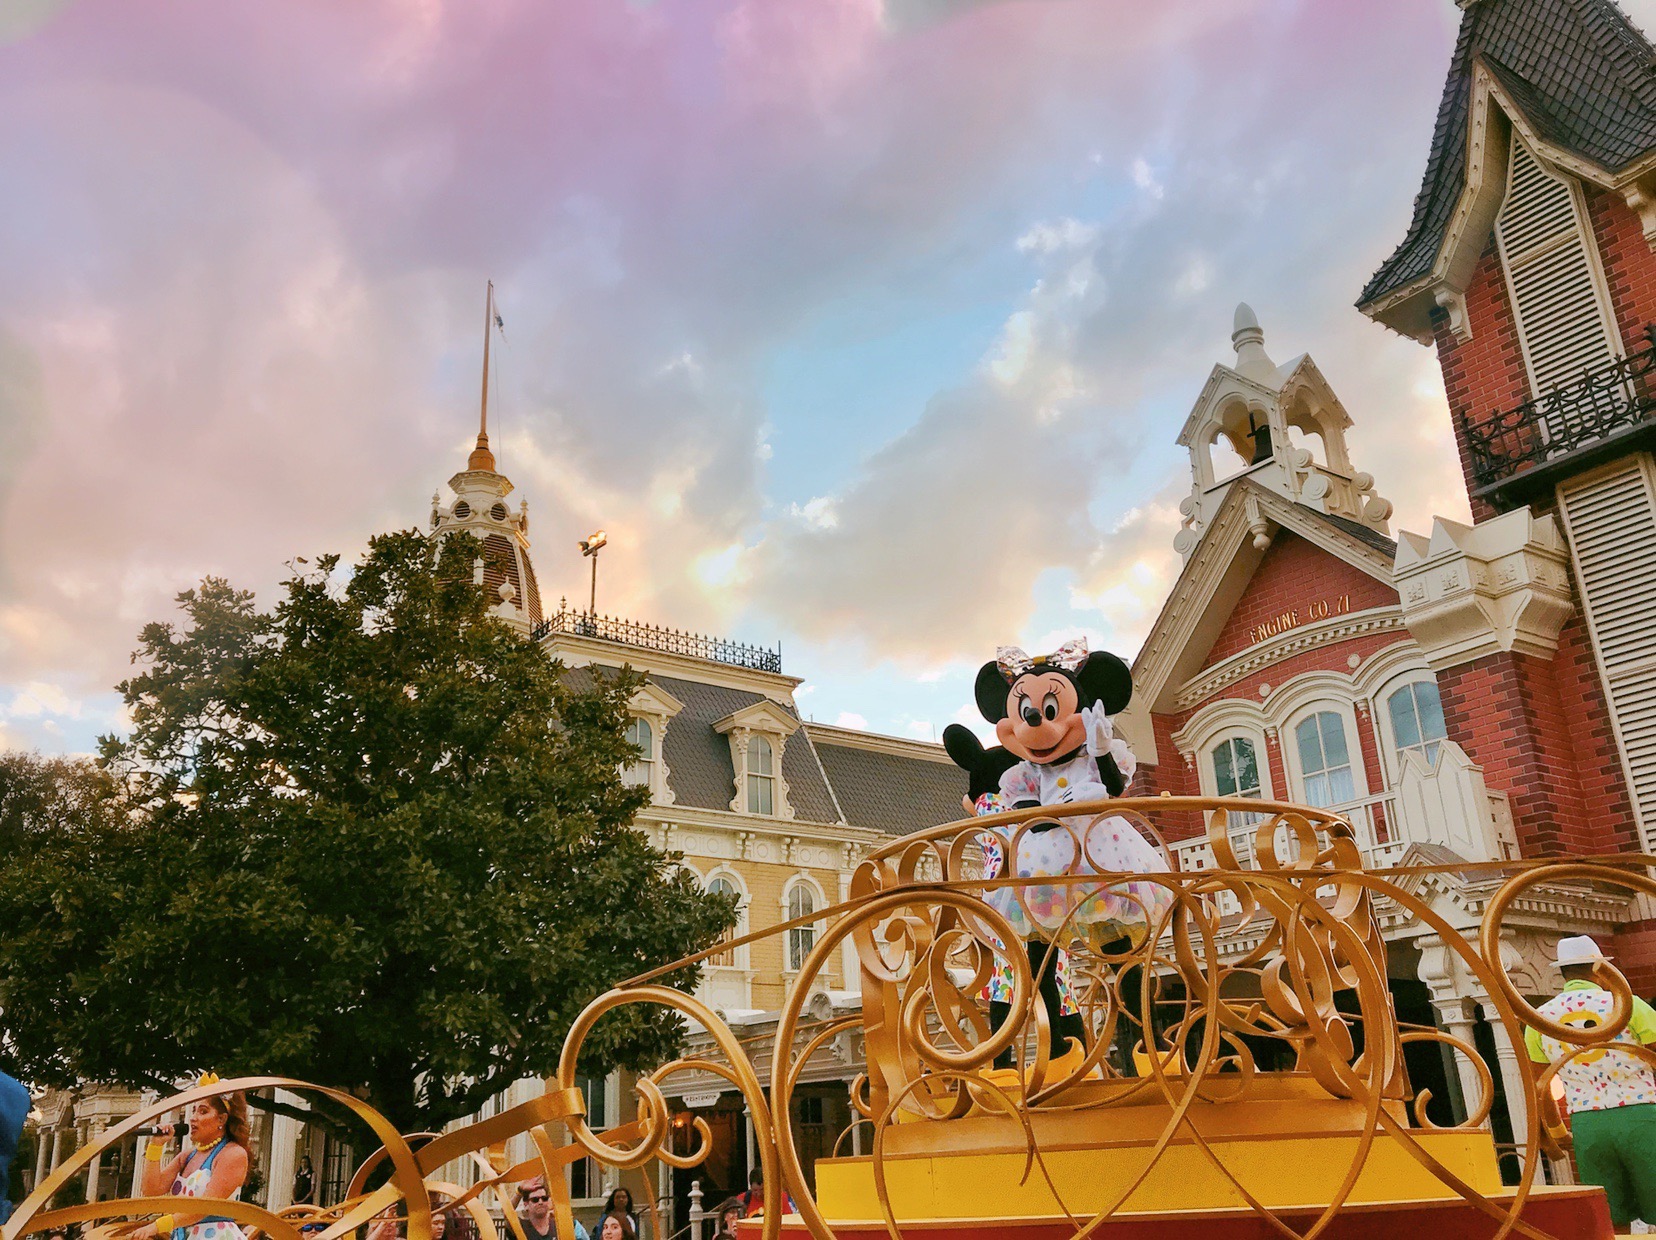 Take magical pictures at Walt Disney World with your phone!